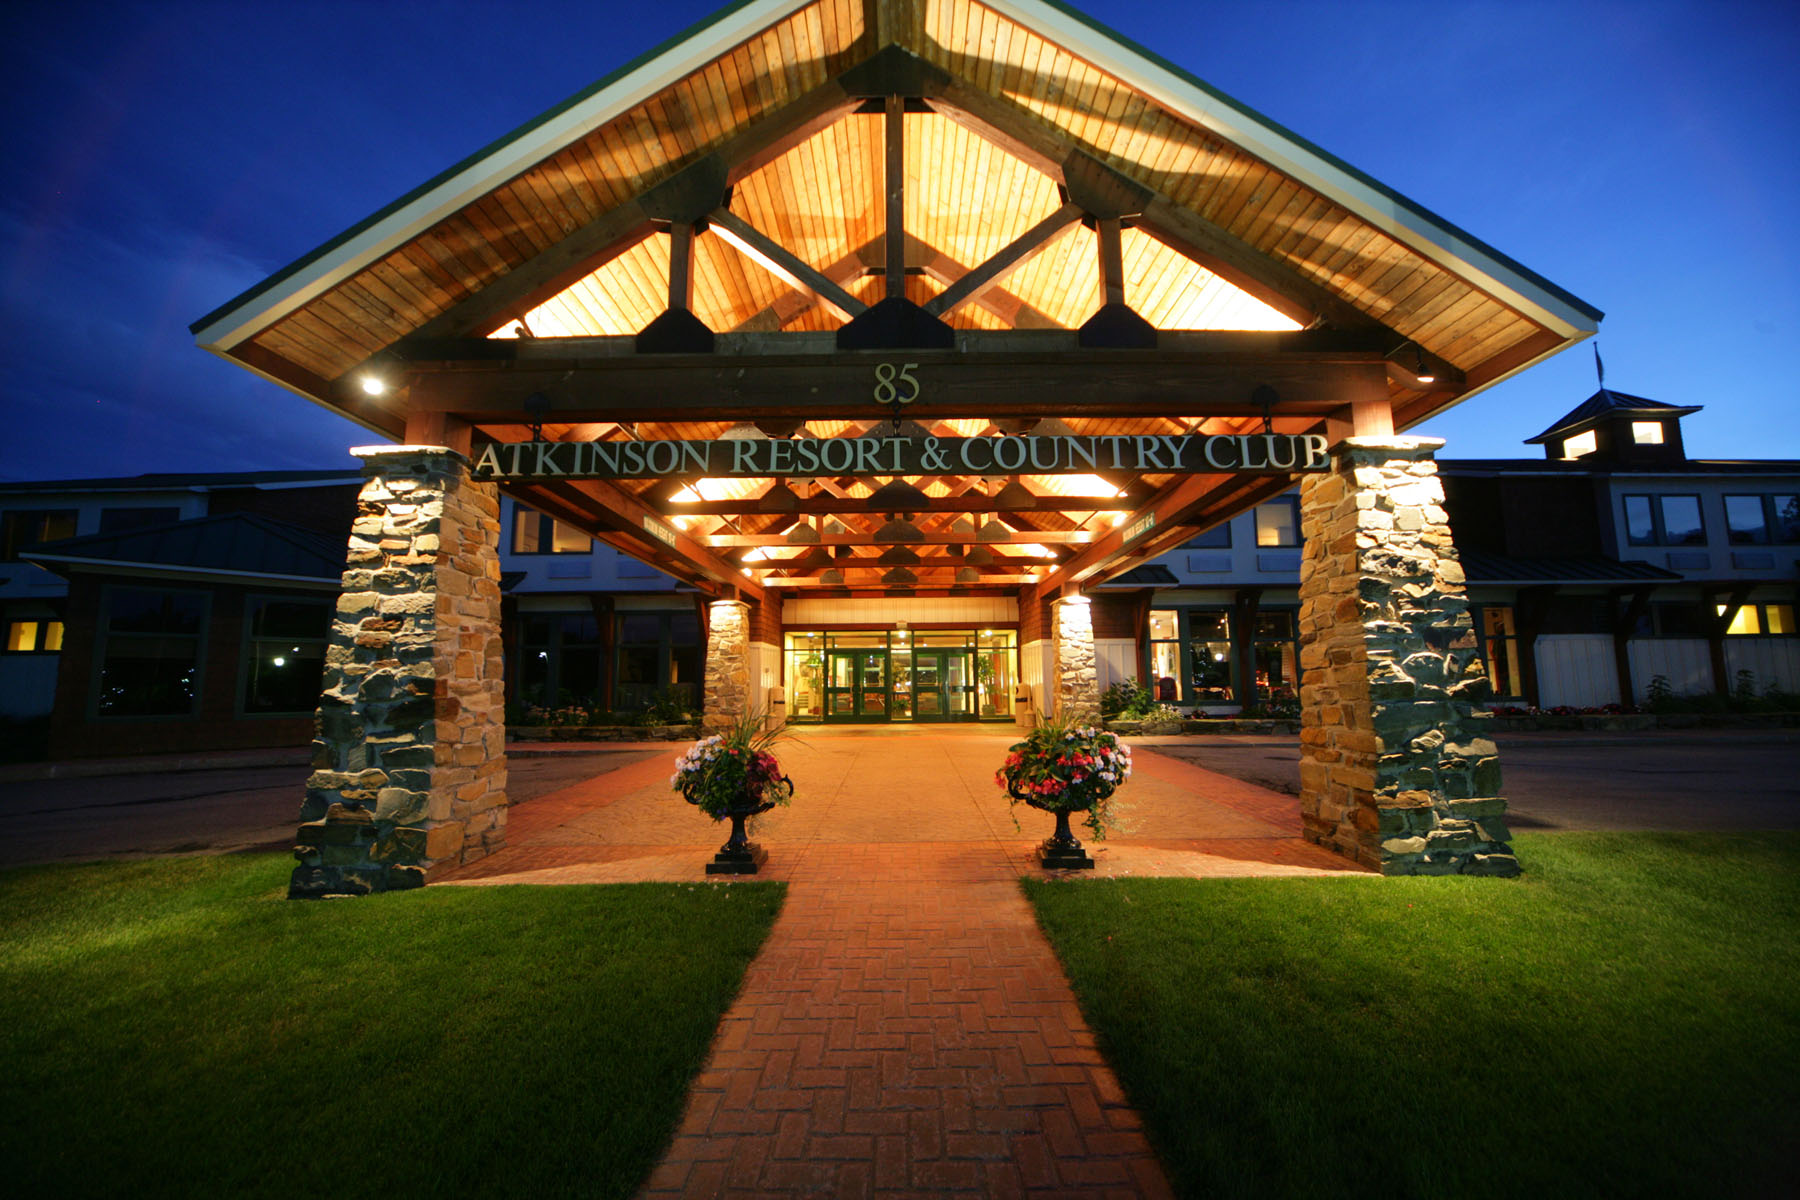 The Atkinson resort and golf club is one of the most beautiful wedding venues in New Hampshire